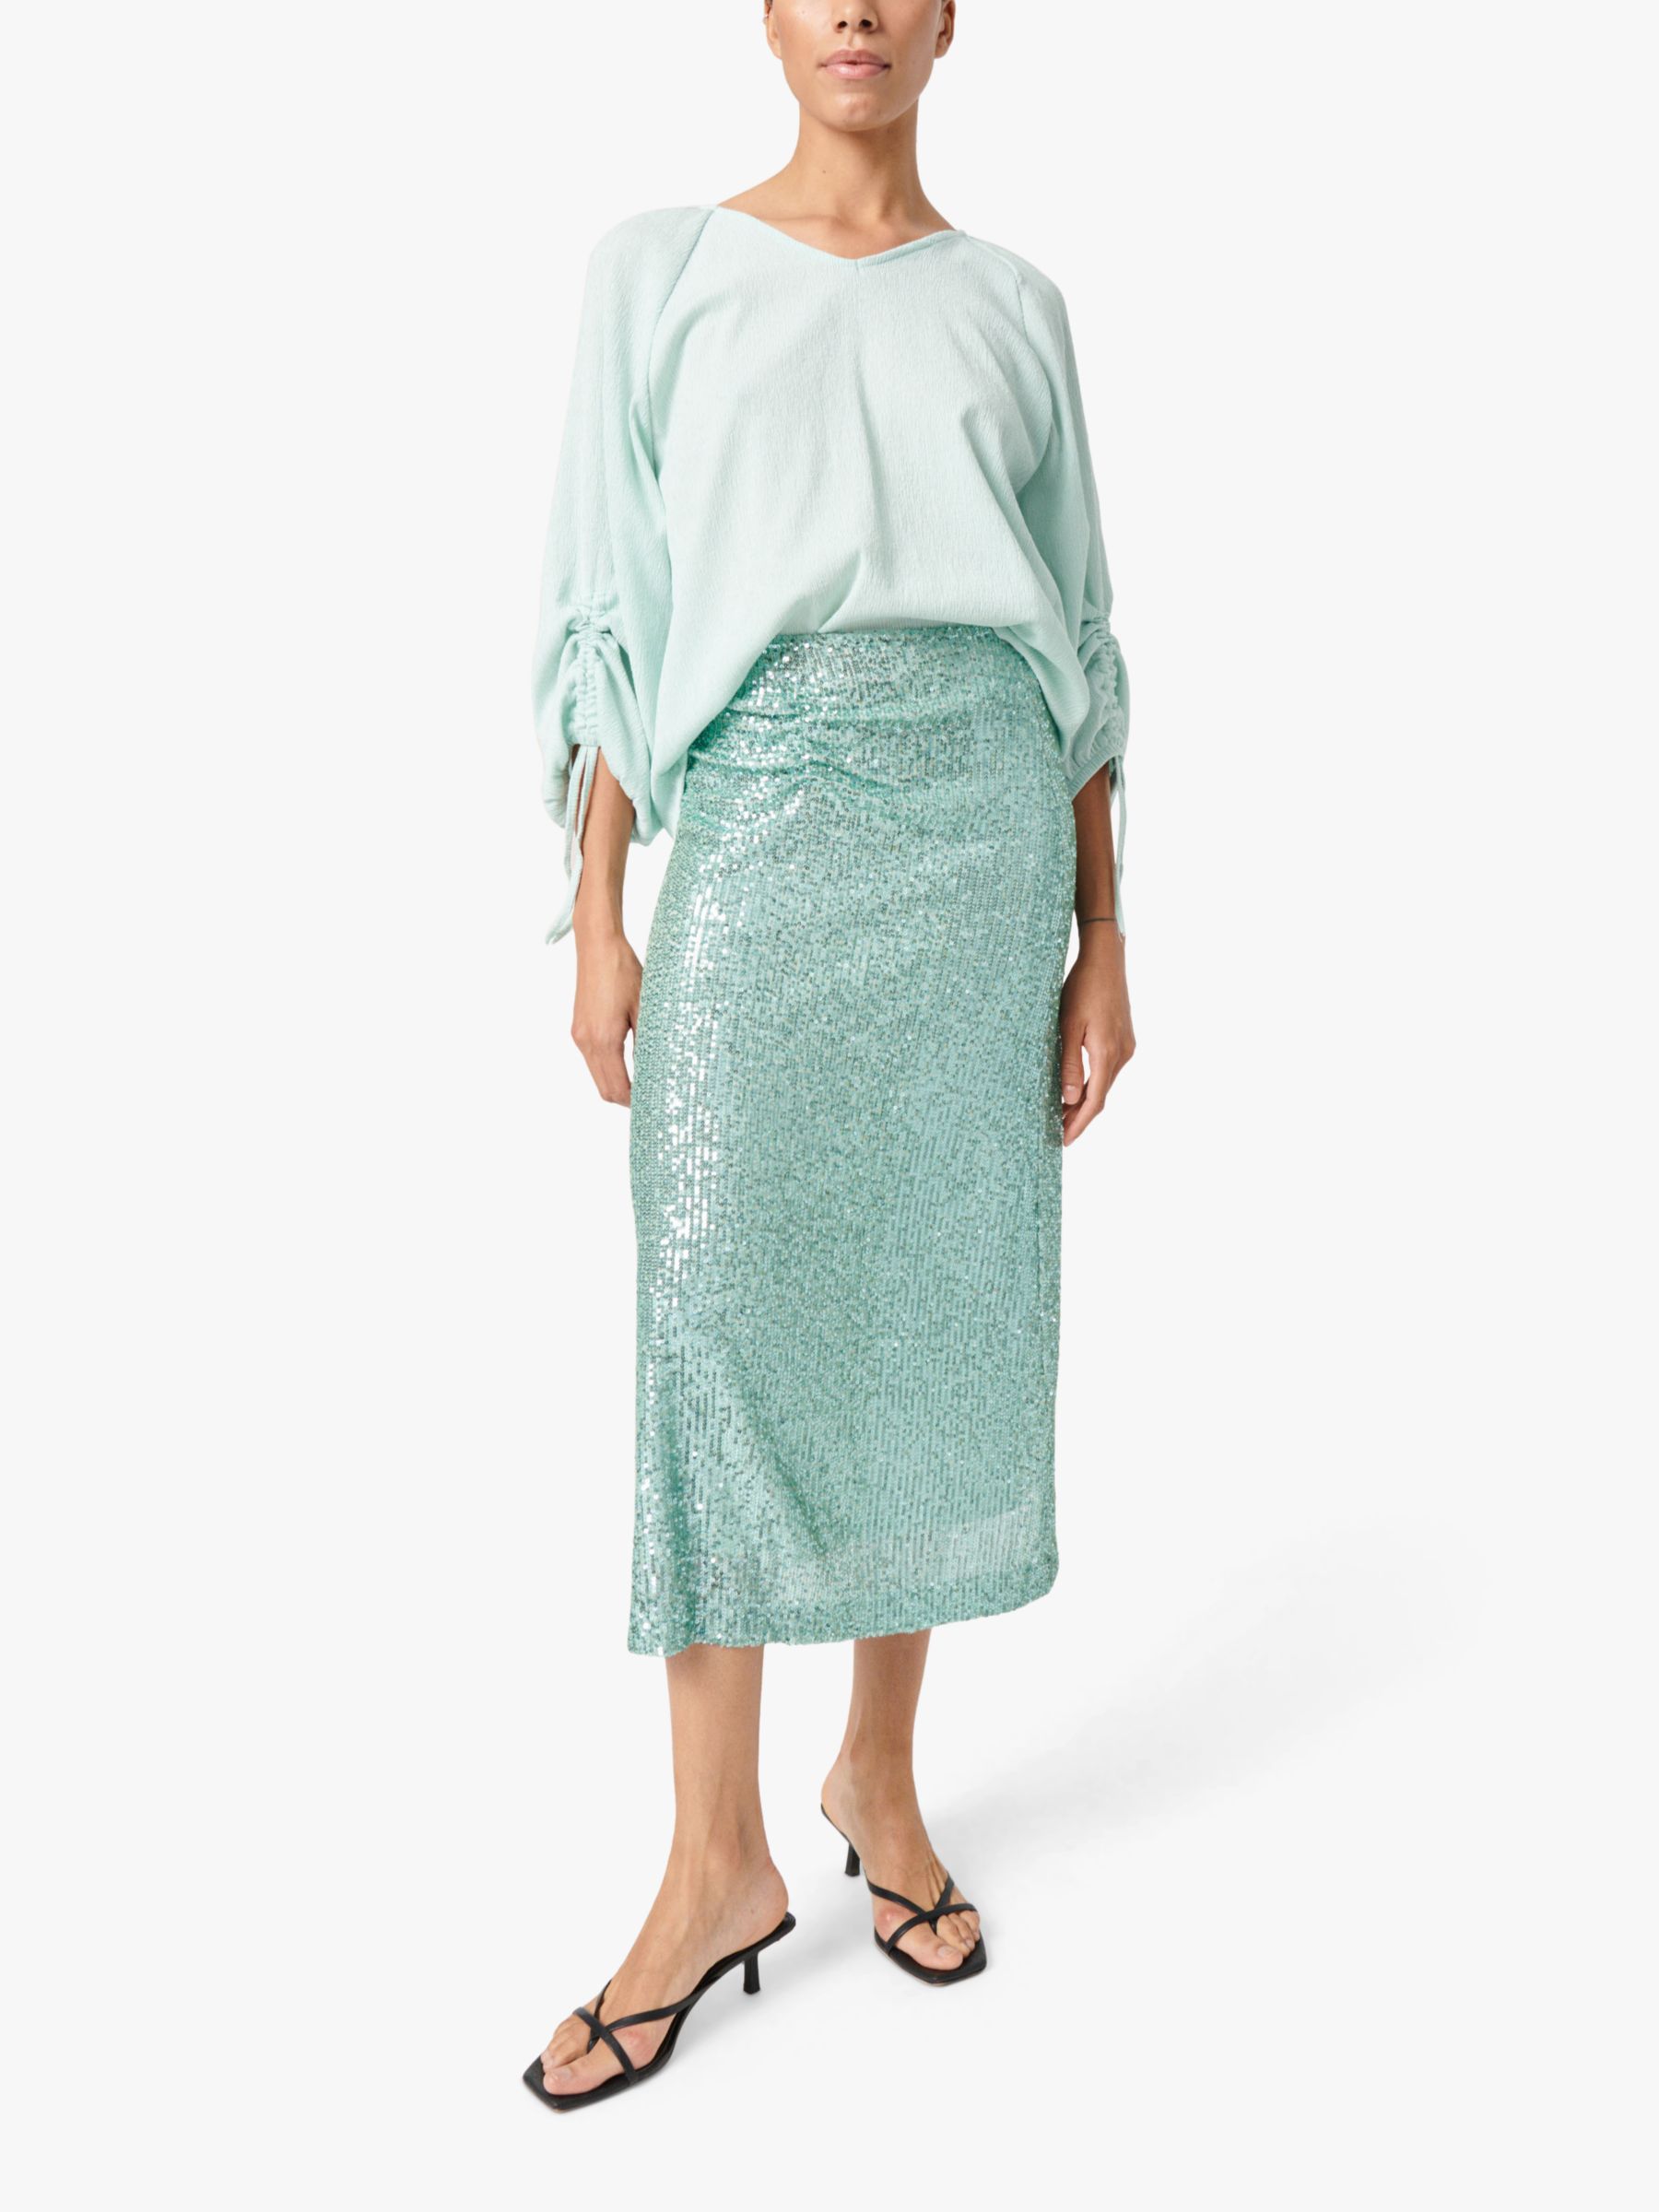 Buy Soaked In Luxury Catharina Drawstring Trim Blouse, Surf Spray Online at johnlewis.com